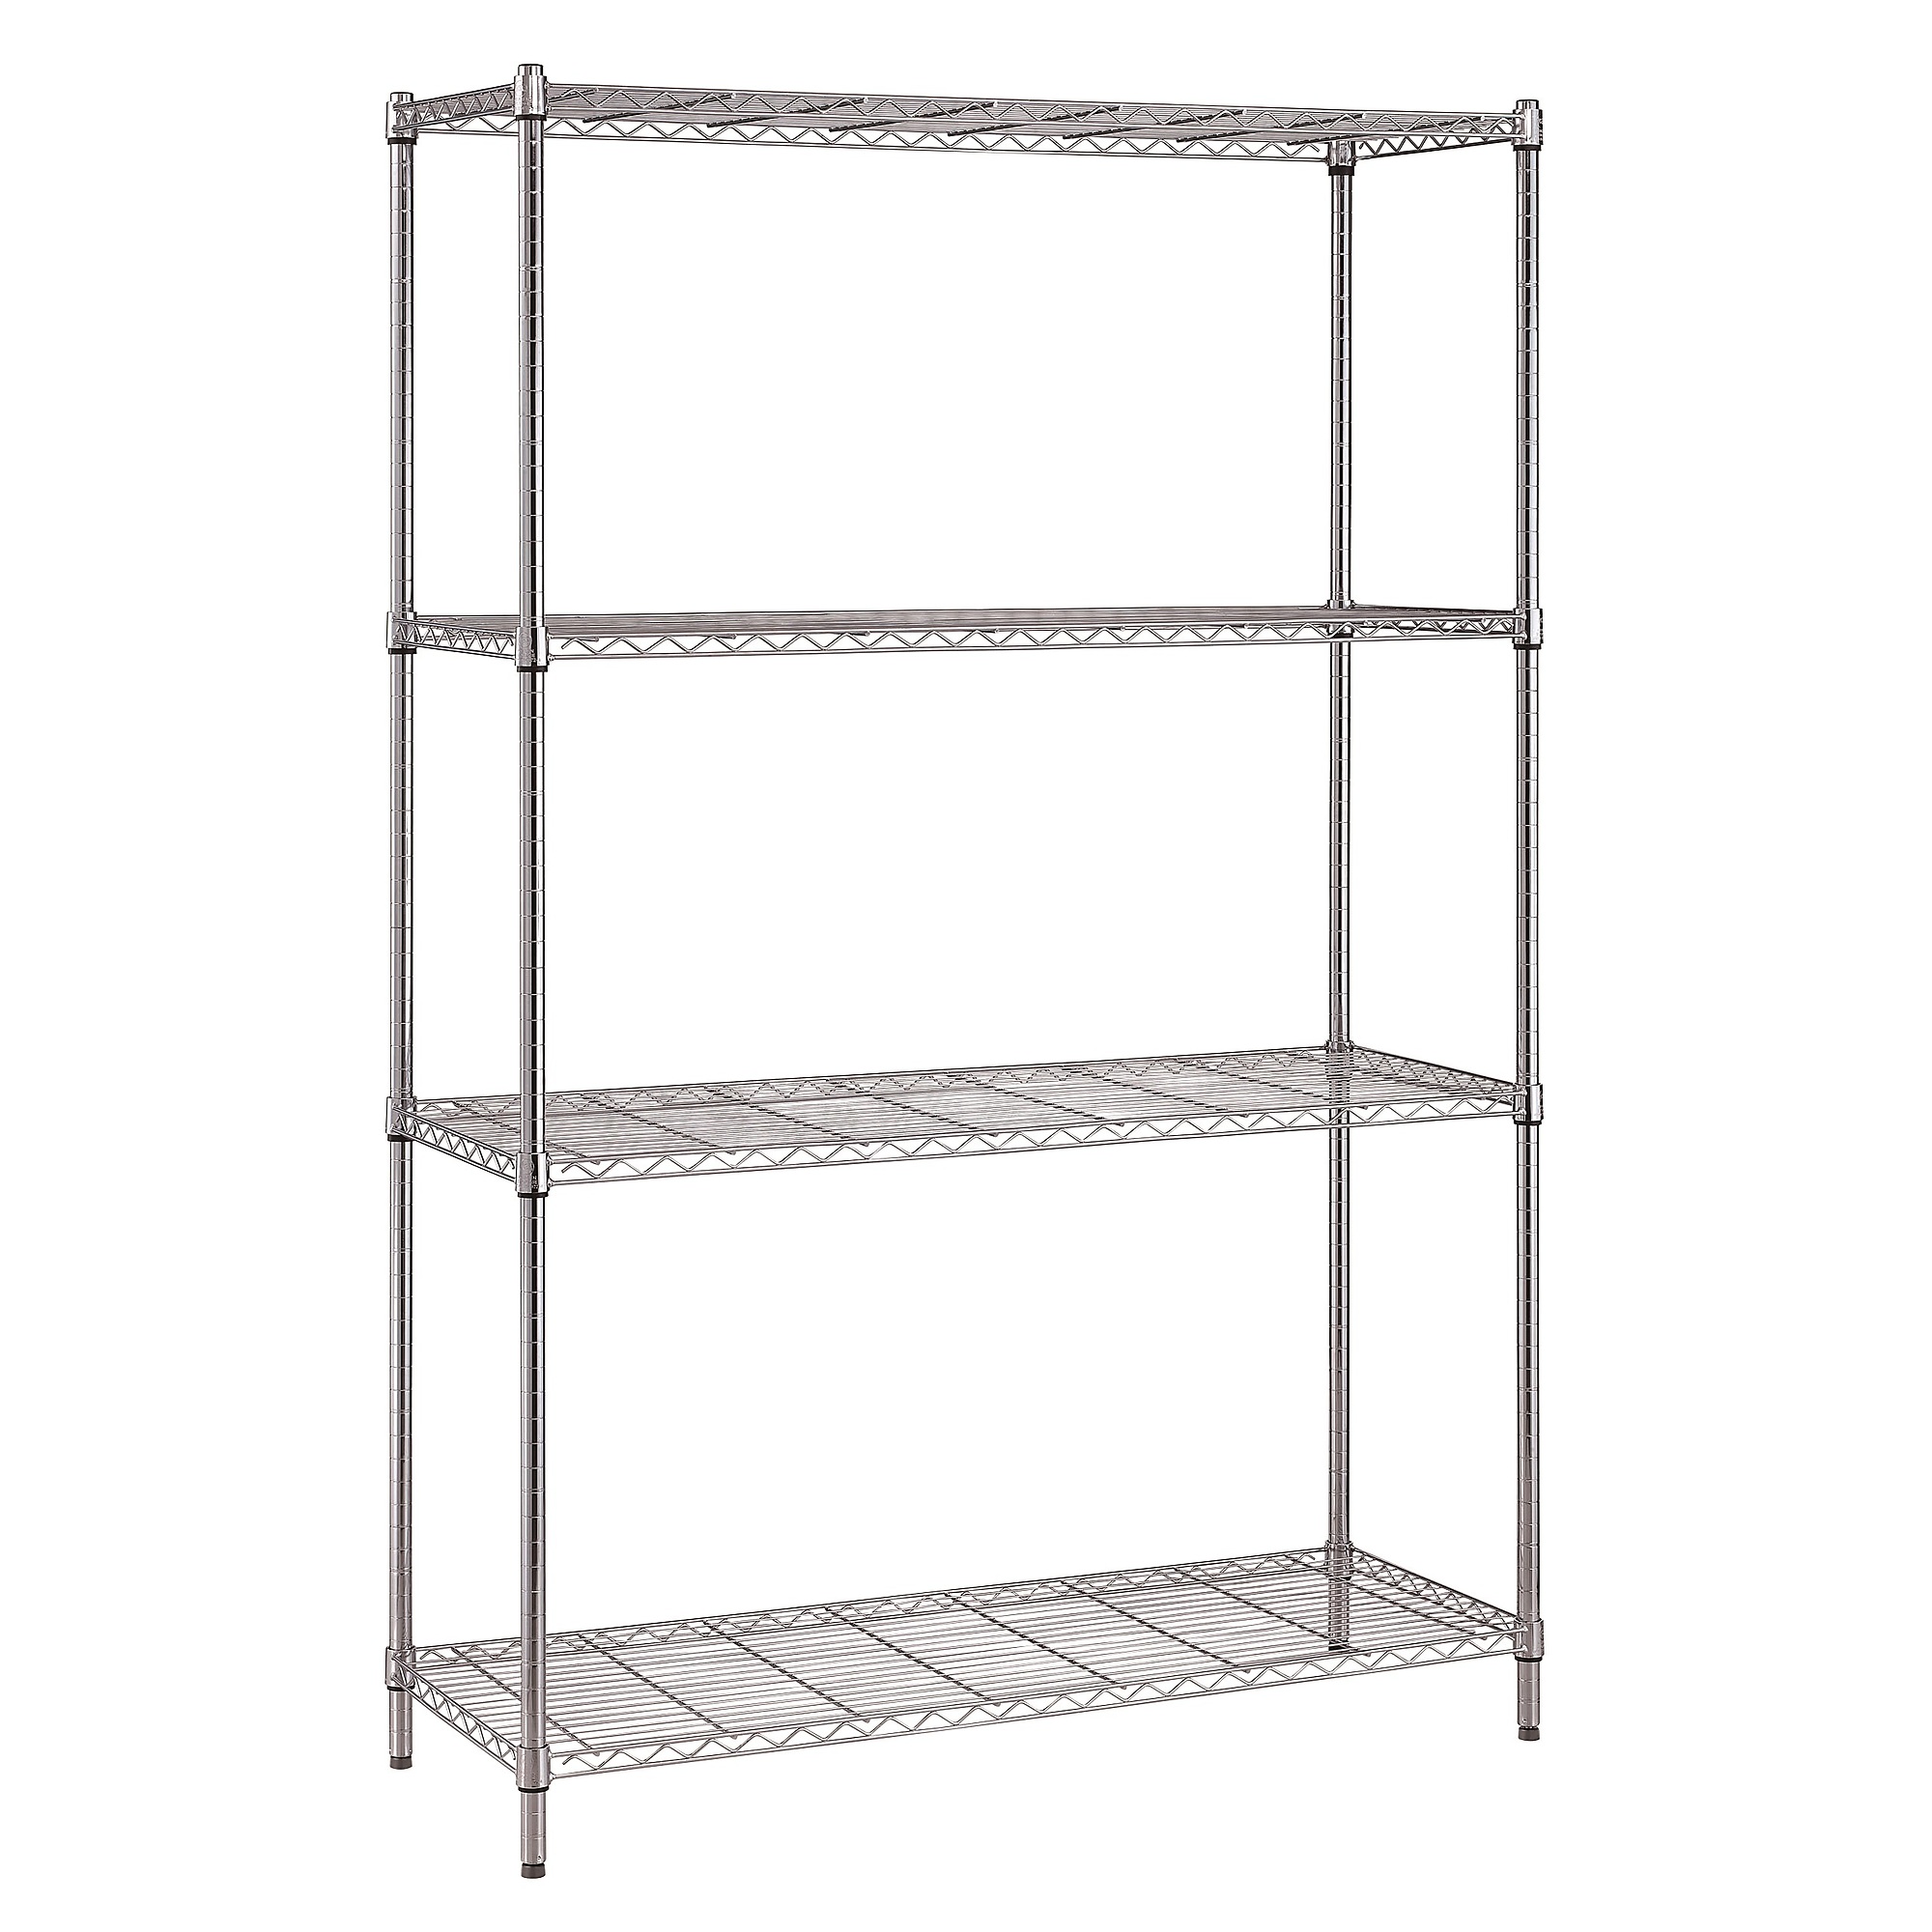 Quantum Storage, Wire 4-Shelf Unit Pk, Chrome Plated Finish, NSF, Height 72 in, Width 48 in, Depth 24 in, Model RWR72-2448LD